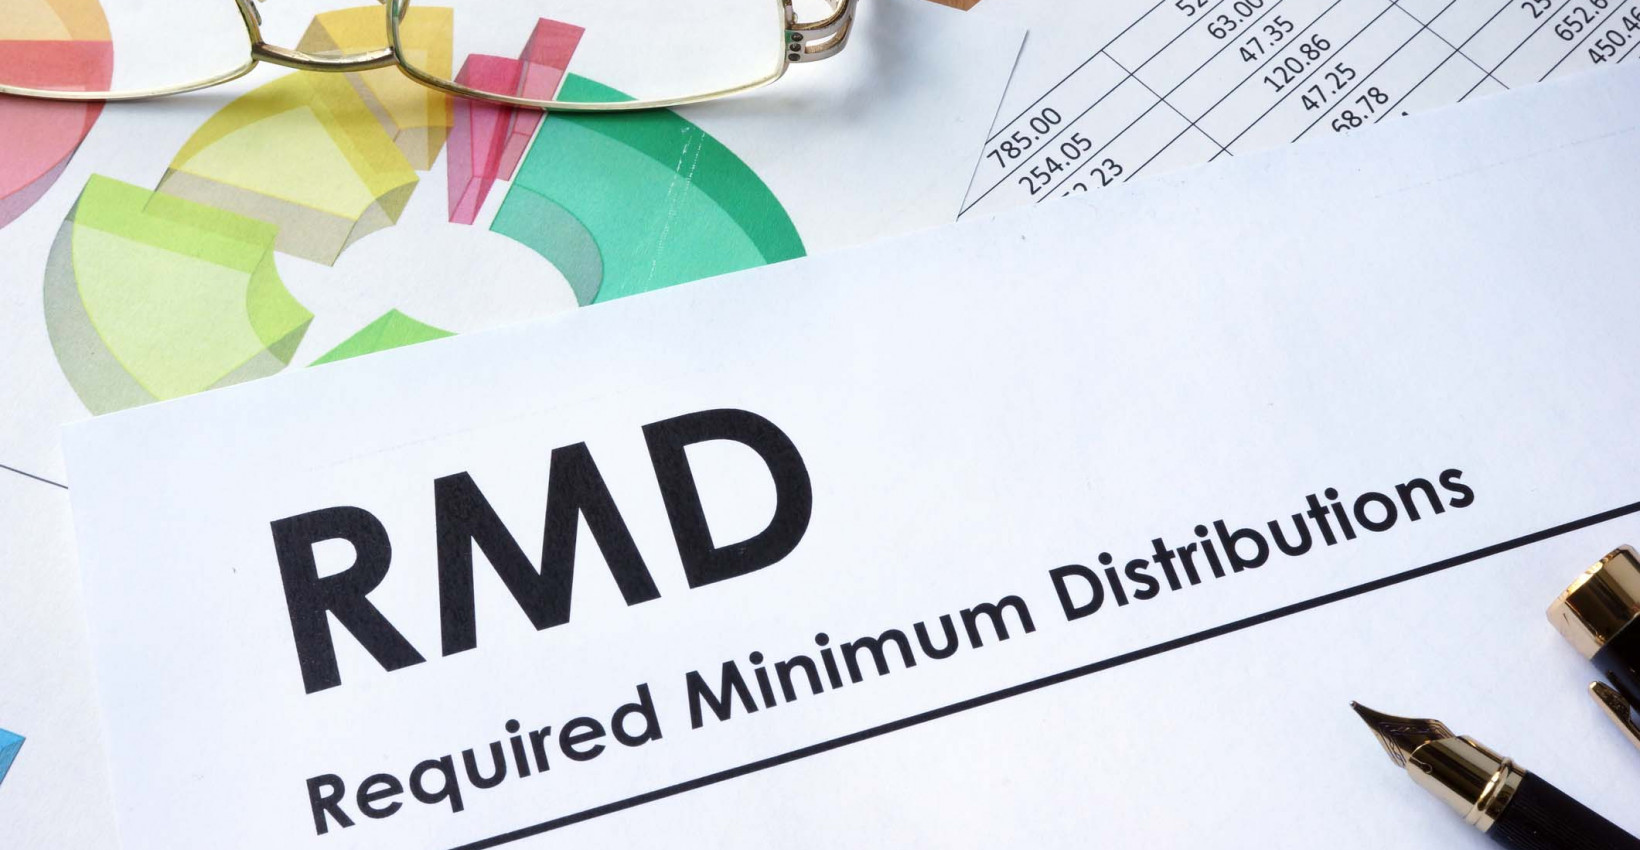 Glasses laying on a sheet of paper that says "RMD"